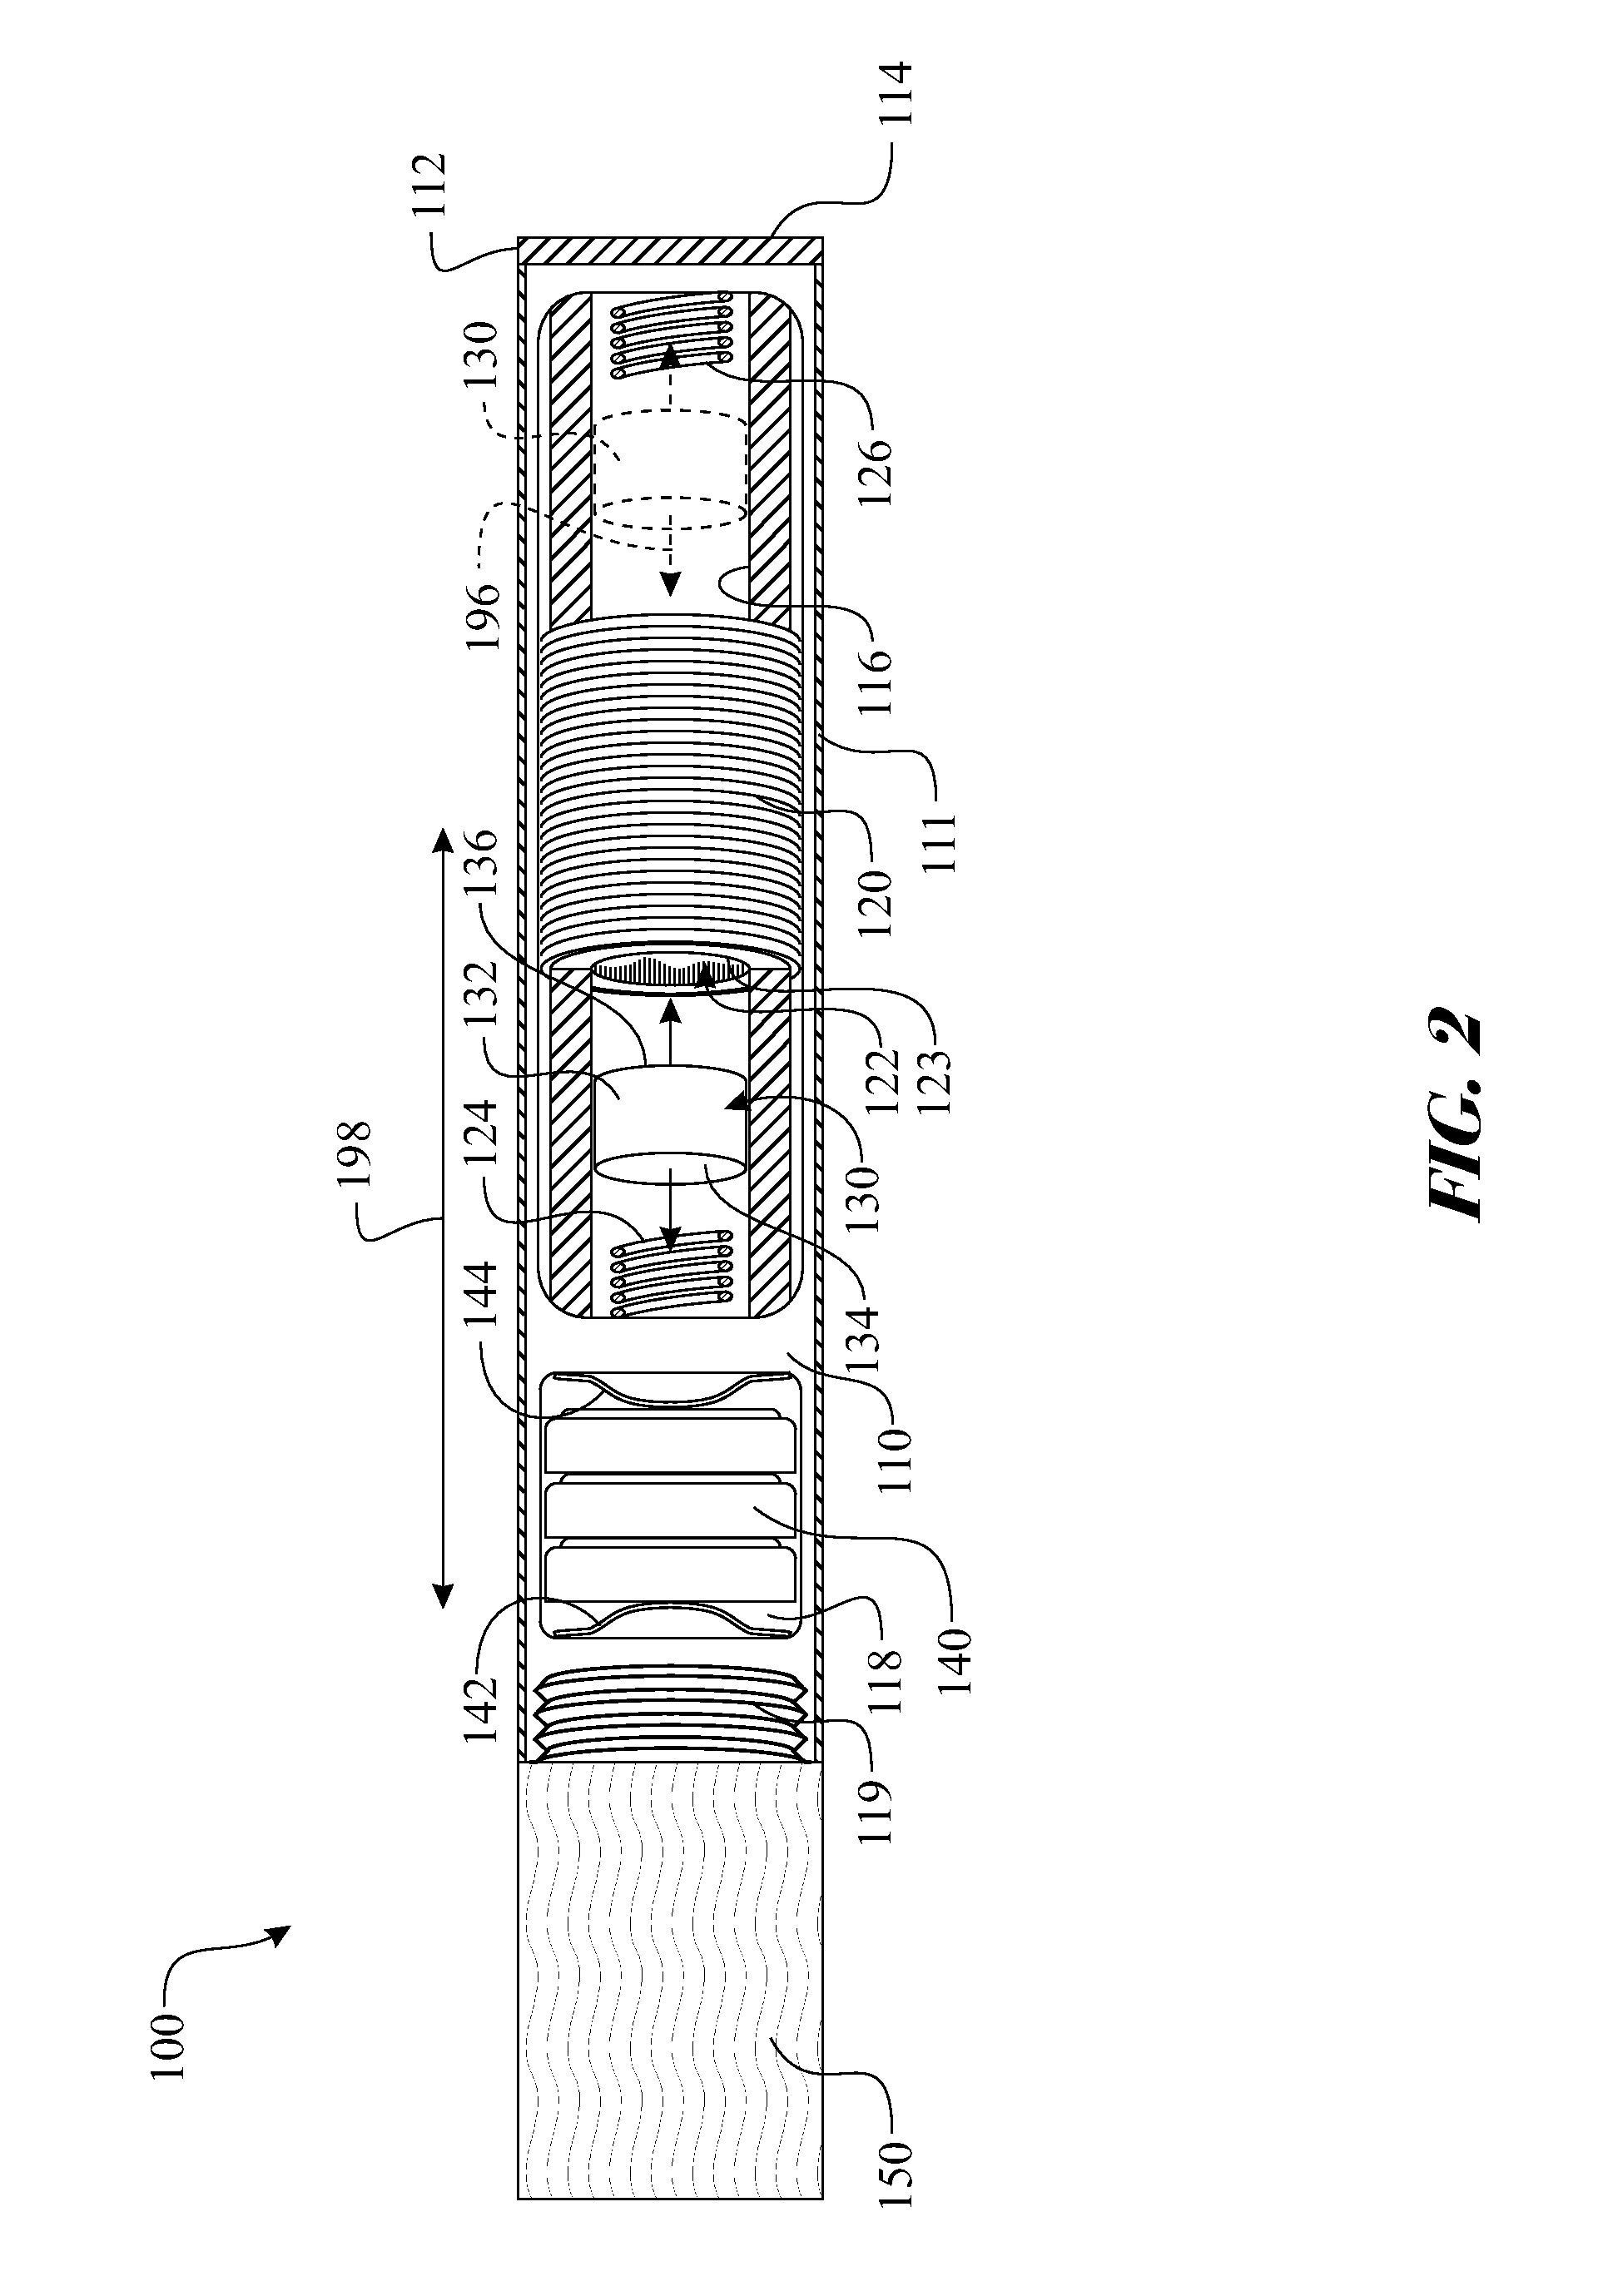 Electronic cigarette with integrated charging mechanism